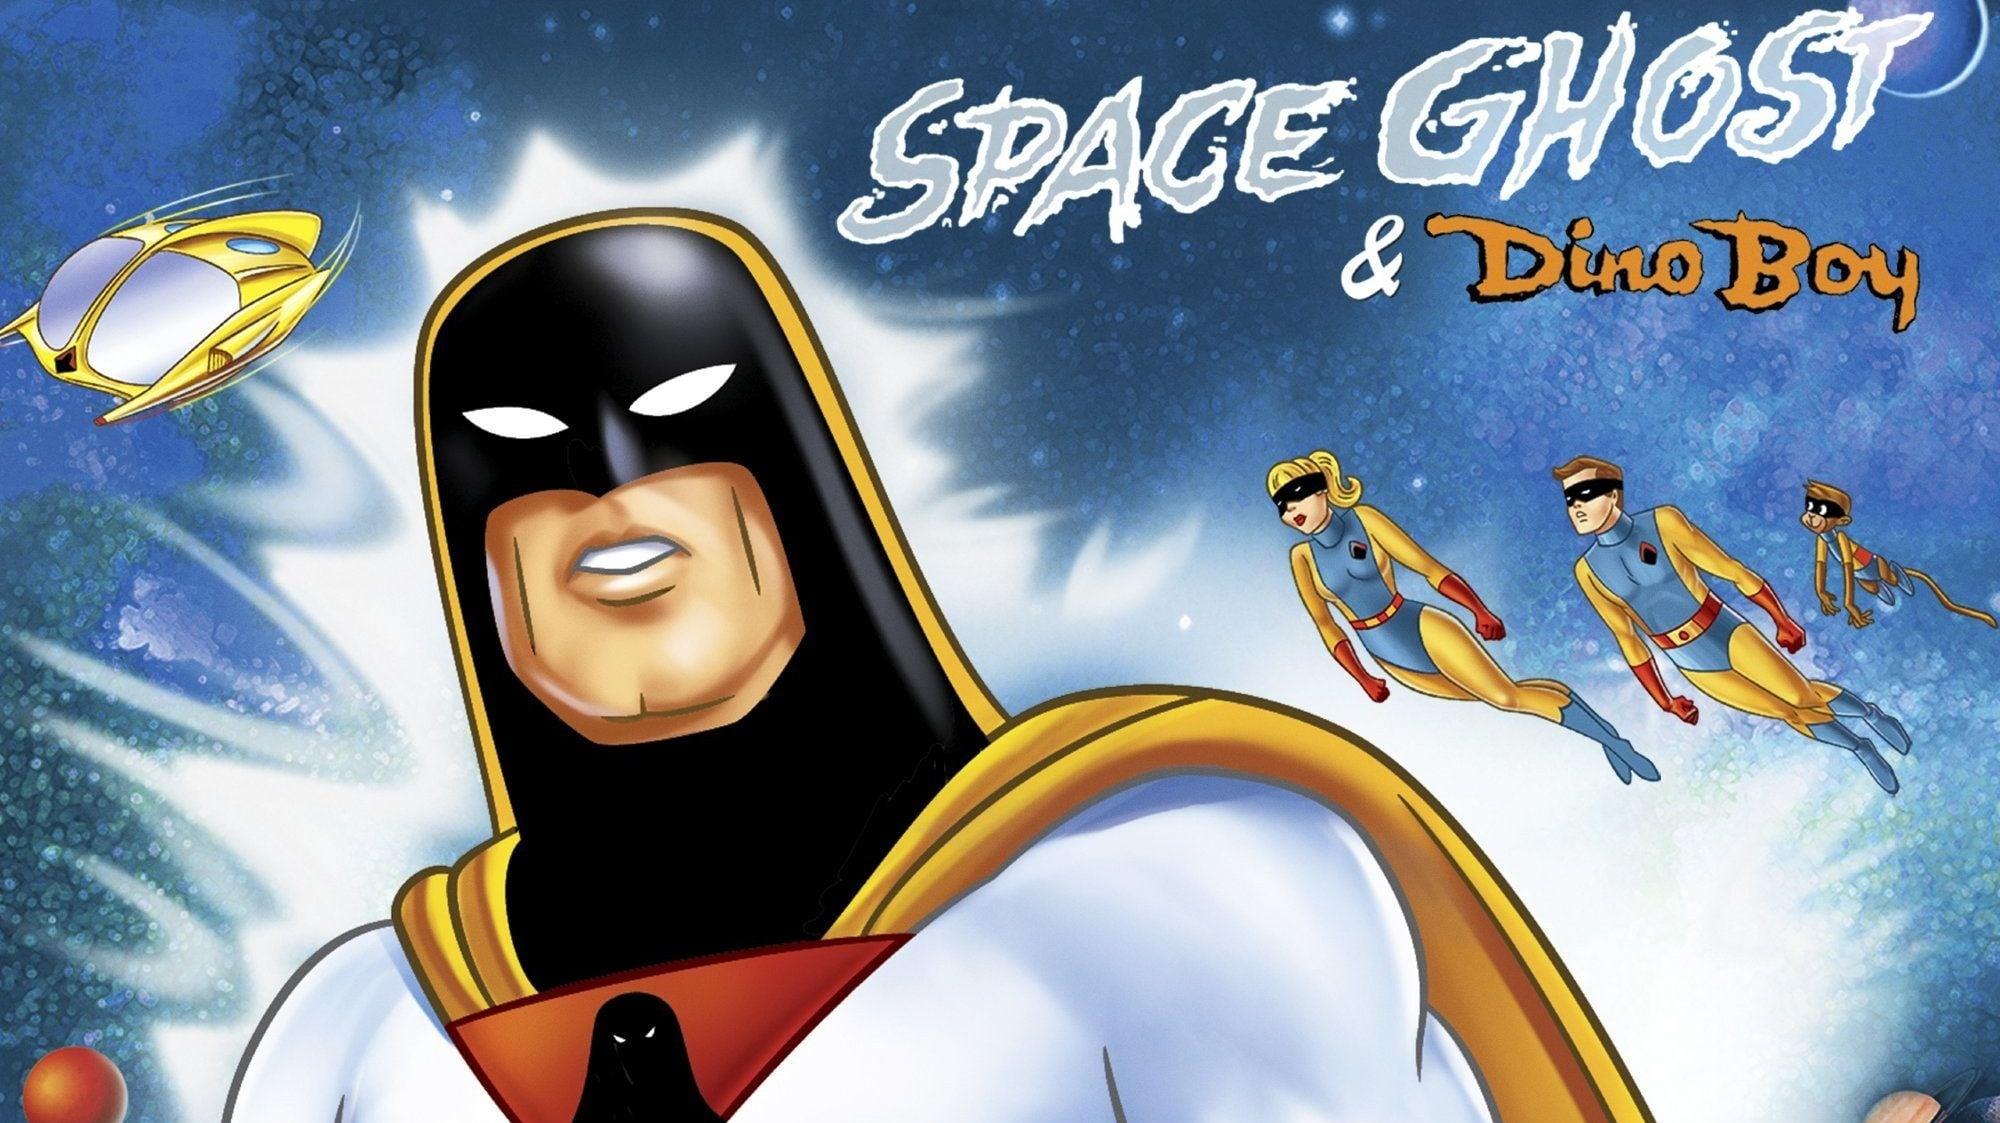 Space Ghost and Dino Boy backdrop